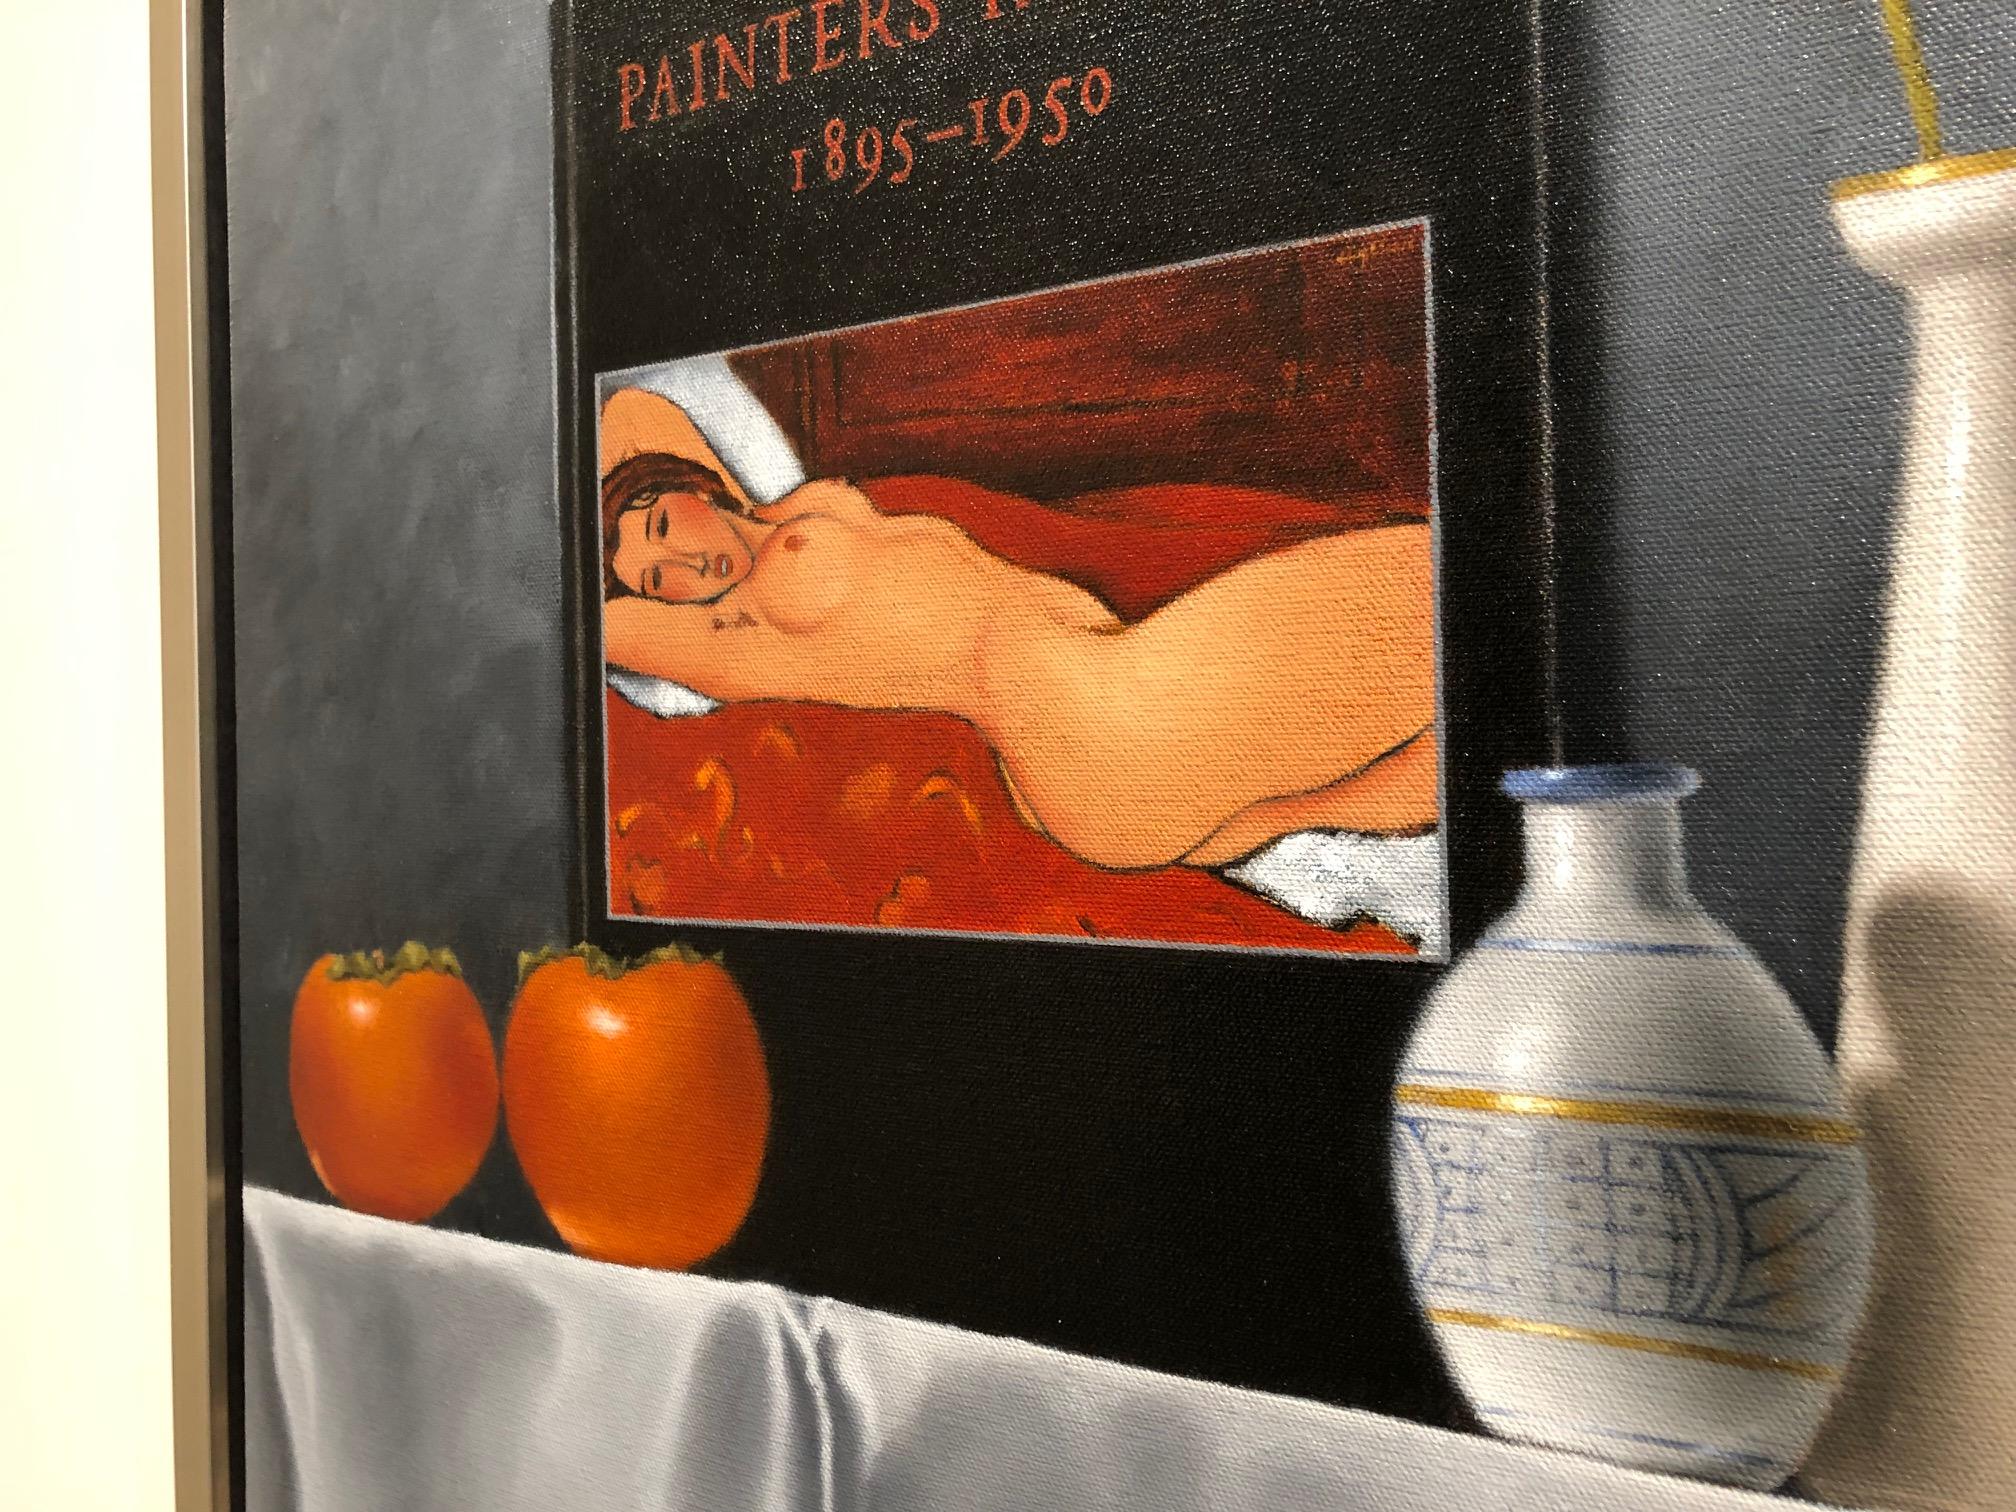 'Painters of Paris' features the book by the same title by William S. Lieberman, which features Modigliani's Reclining Nude and was published by the Metropolitan Museum of Art; along with Persimmons, orange flowers and an array of white porcelain